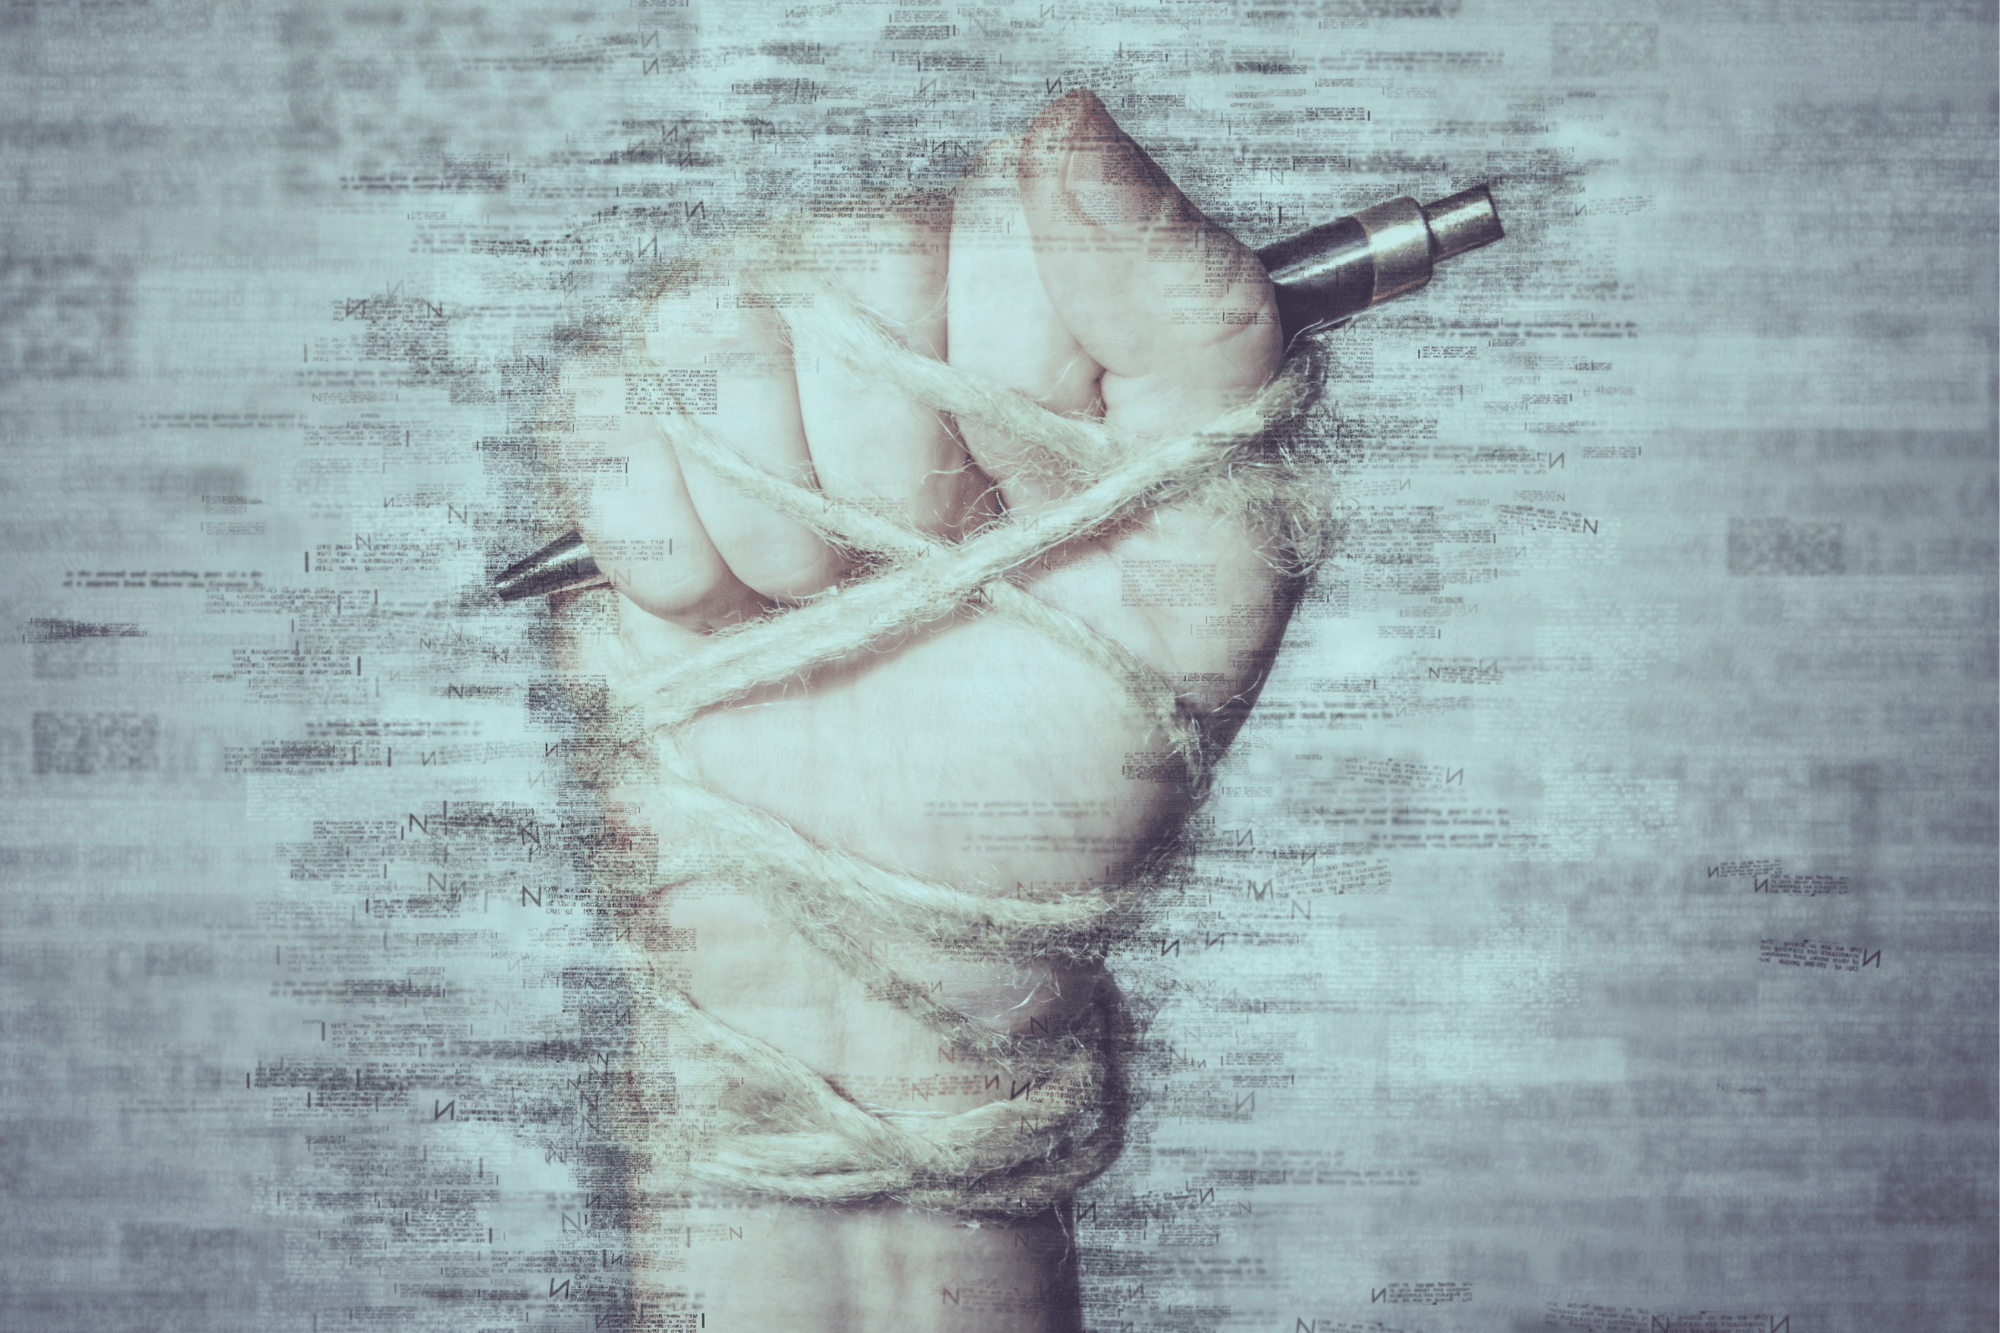 Image of hand holding a pen wrapped in a string.